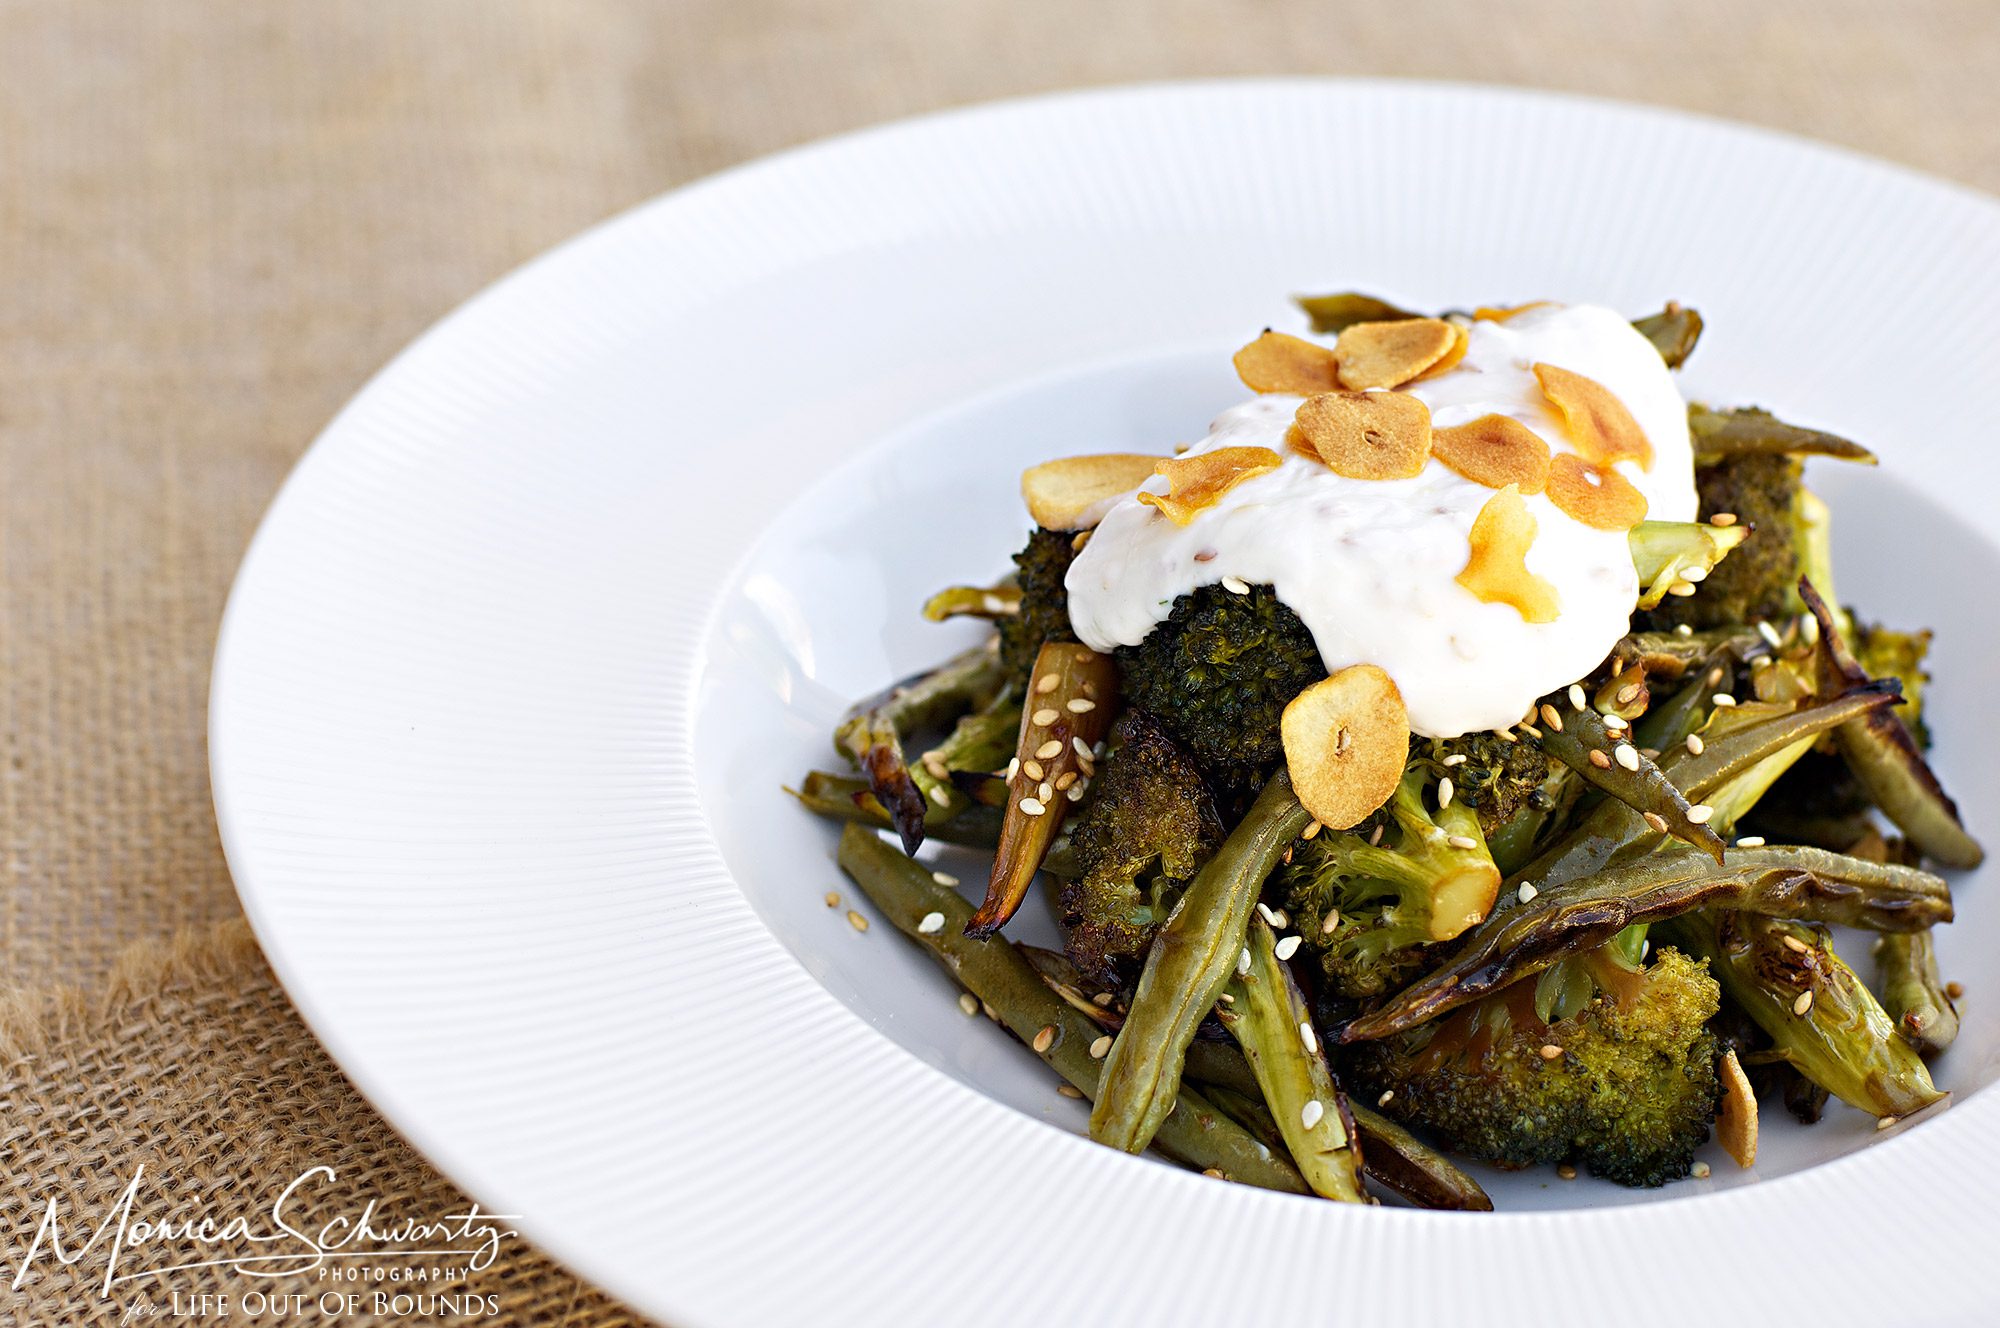 Roasted-beans-and-broccoli-with-sesame-yogurt-by-Chef-Lee-Anne-Wong